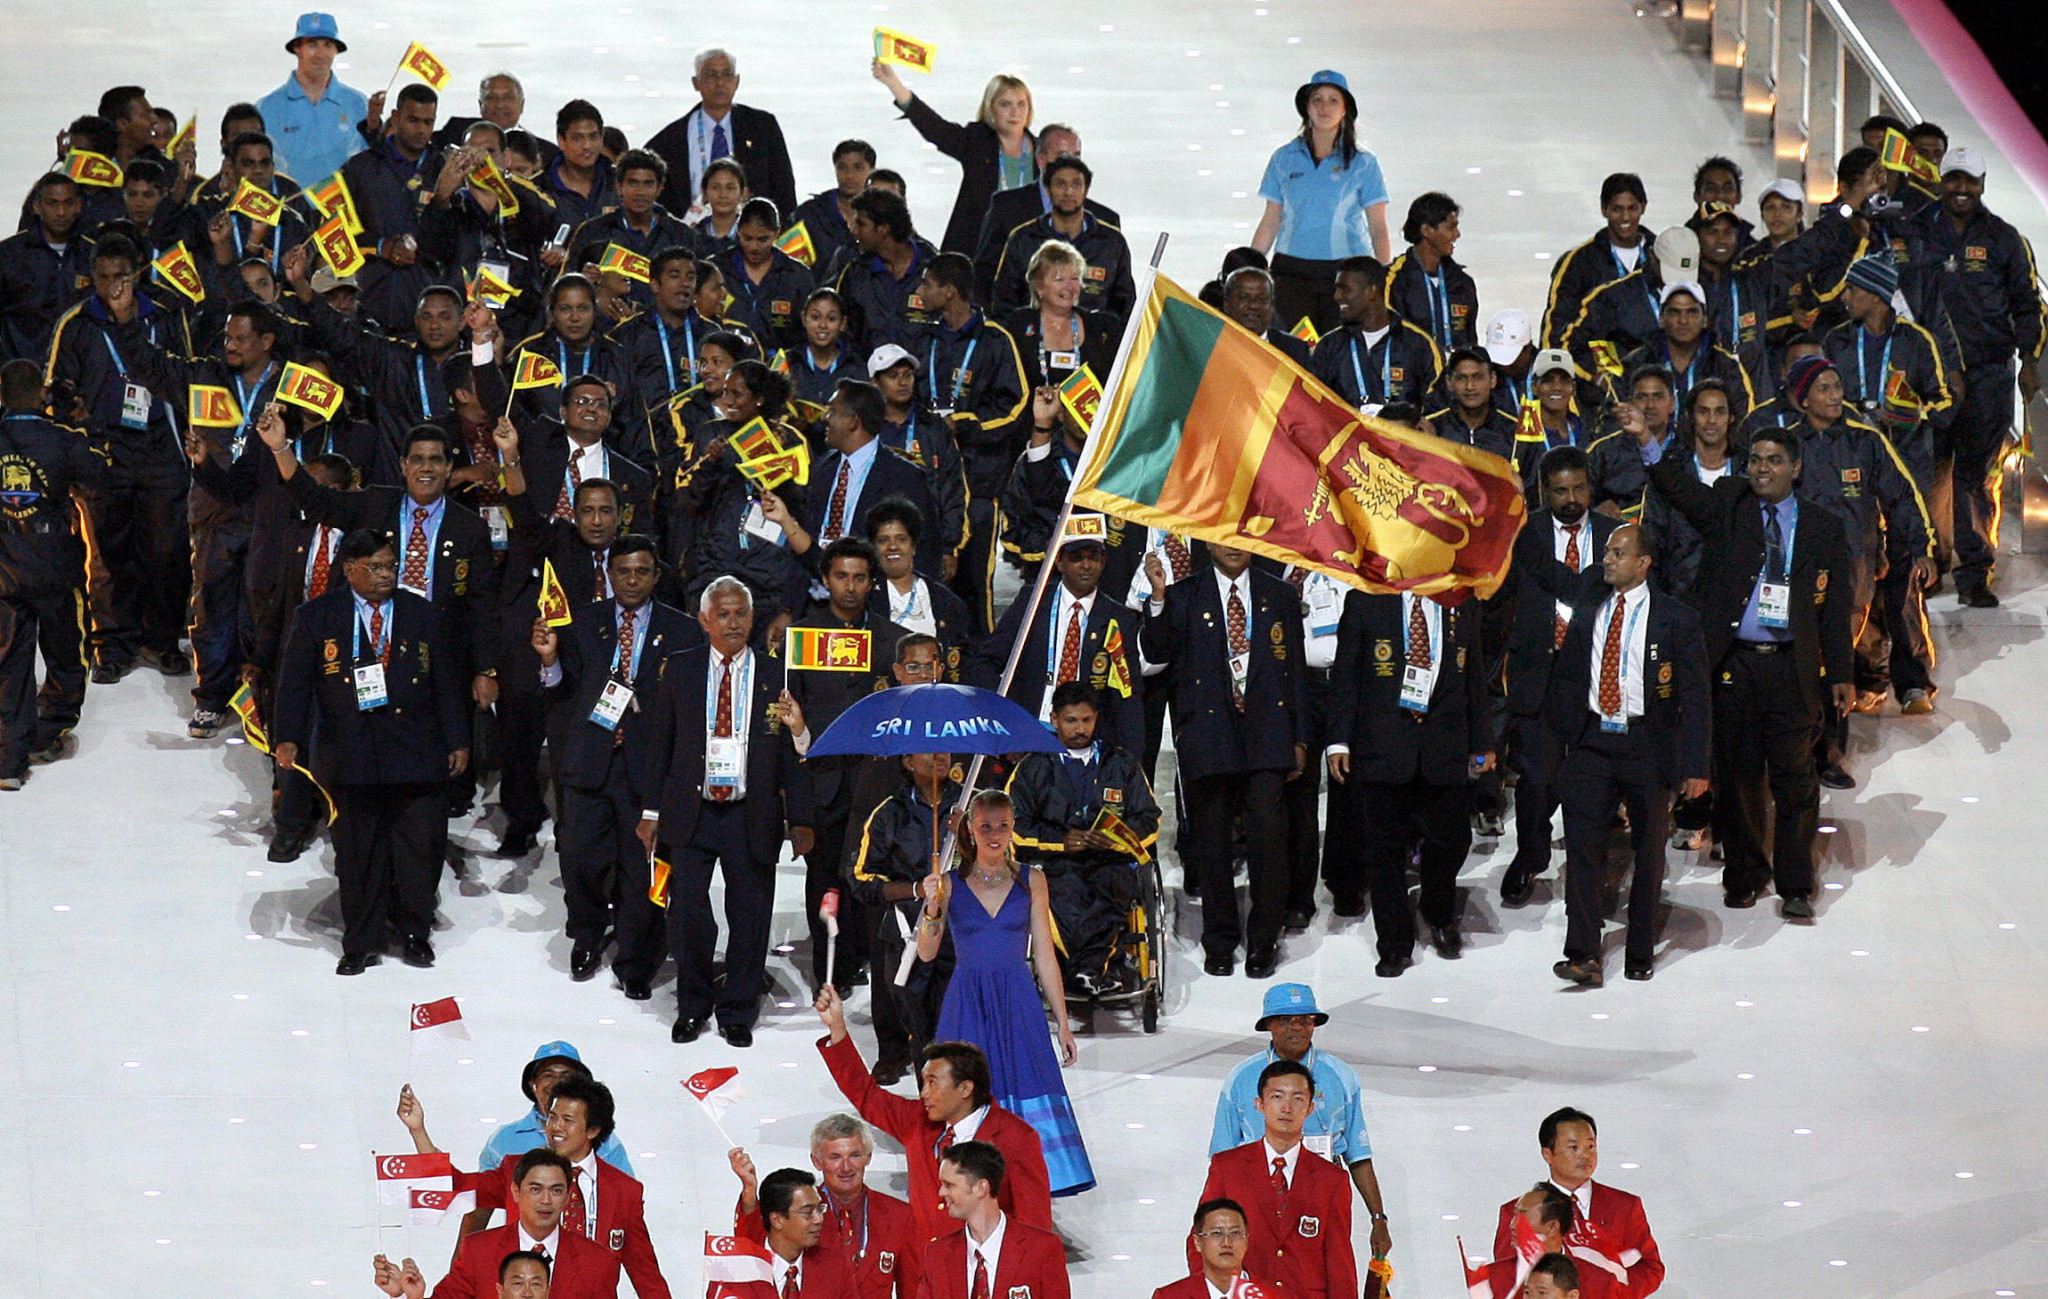 Two Sri Lankan athletes and one official go missing police investigati